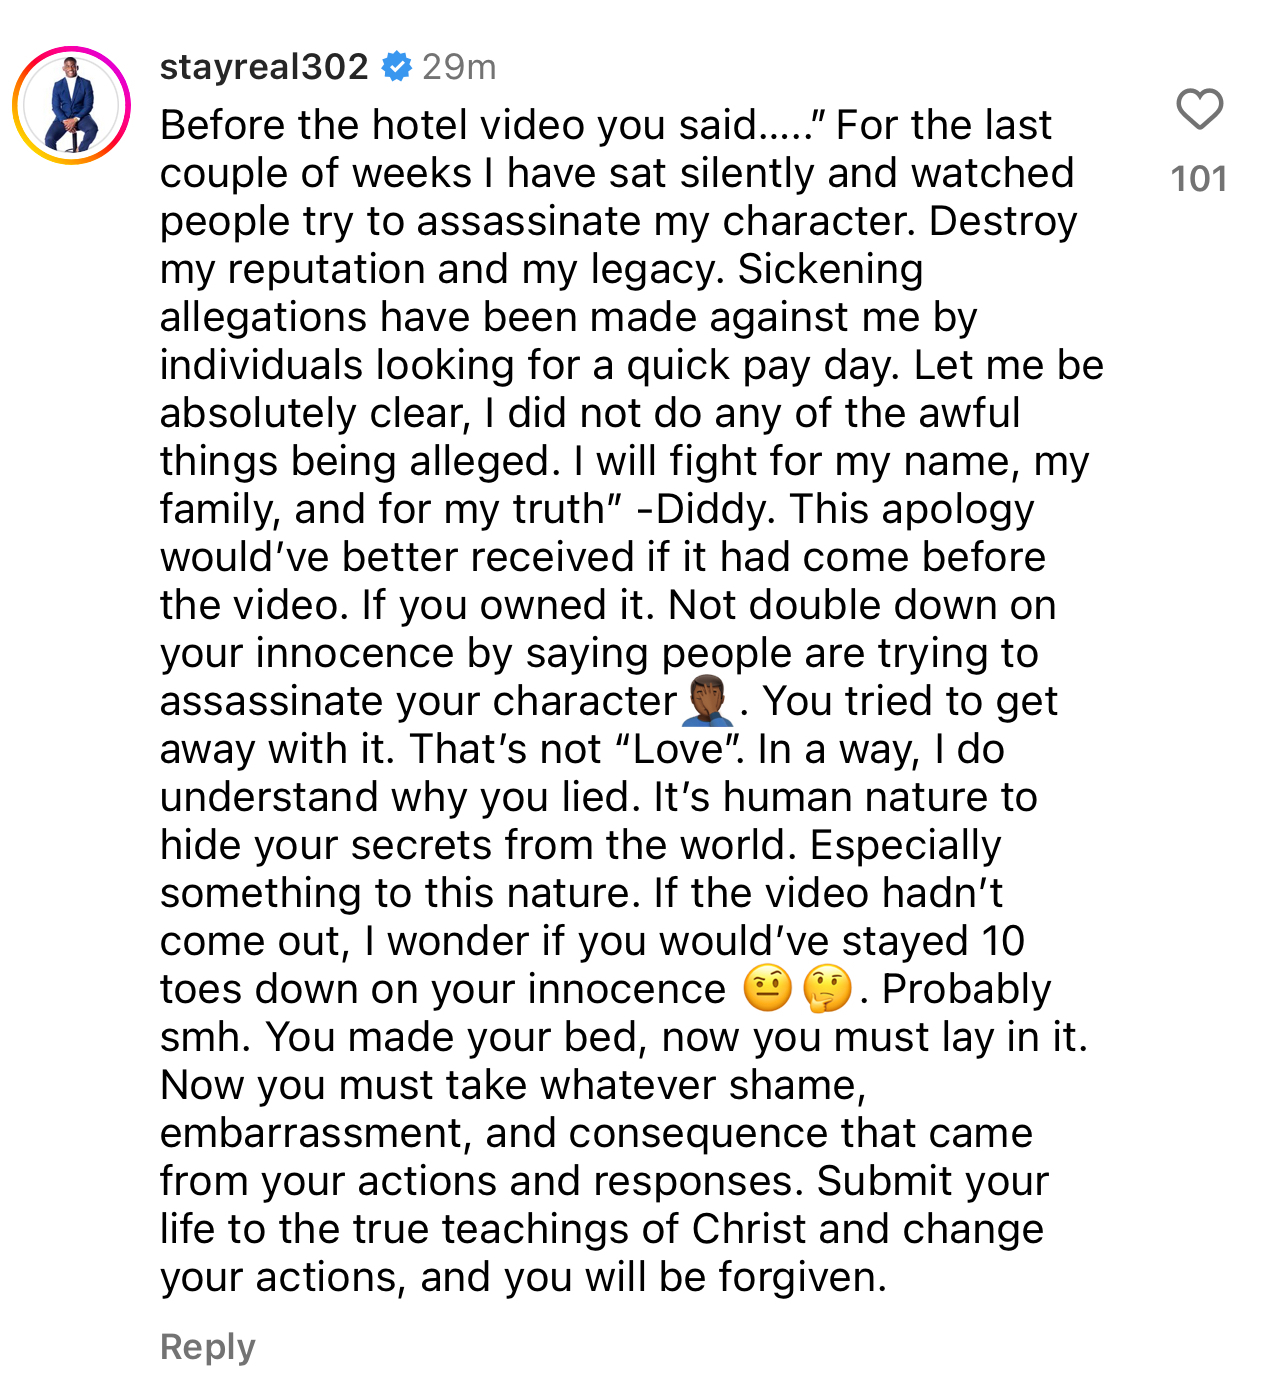 Instagram comment from stayreal302 addressing accusations against their character, expressing feelings of betrayal and urging the alleged accuser to change their ways